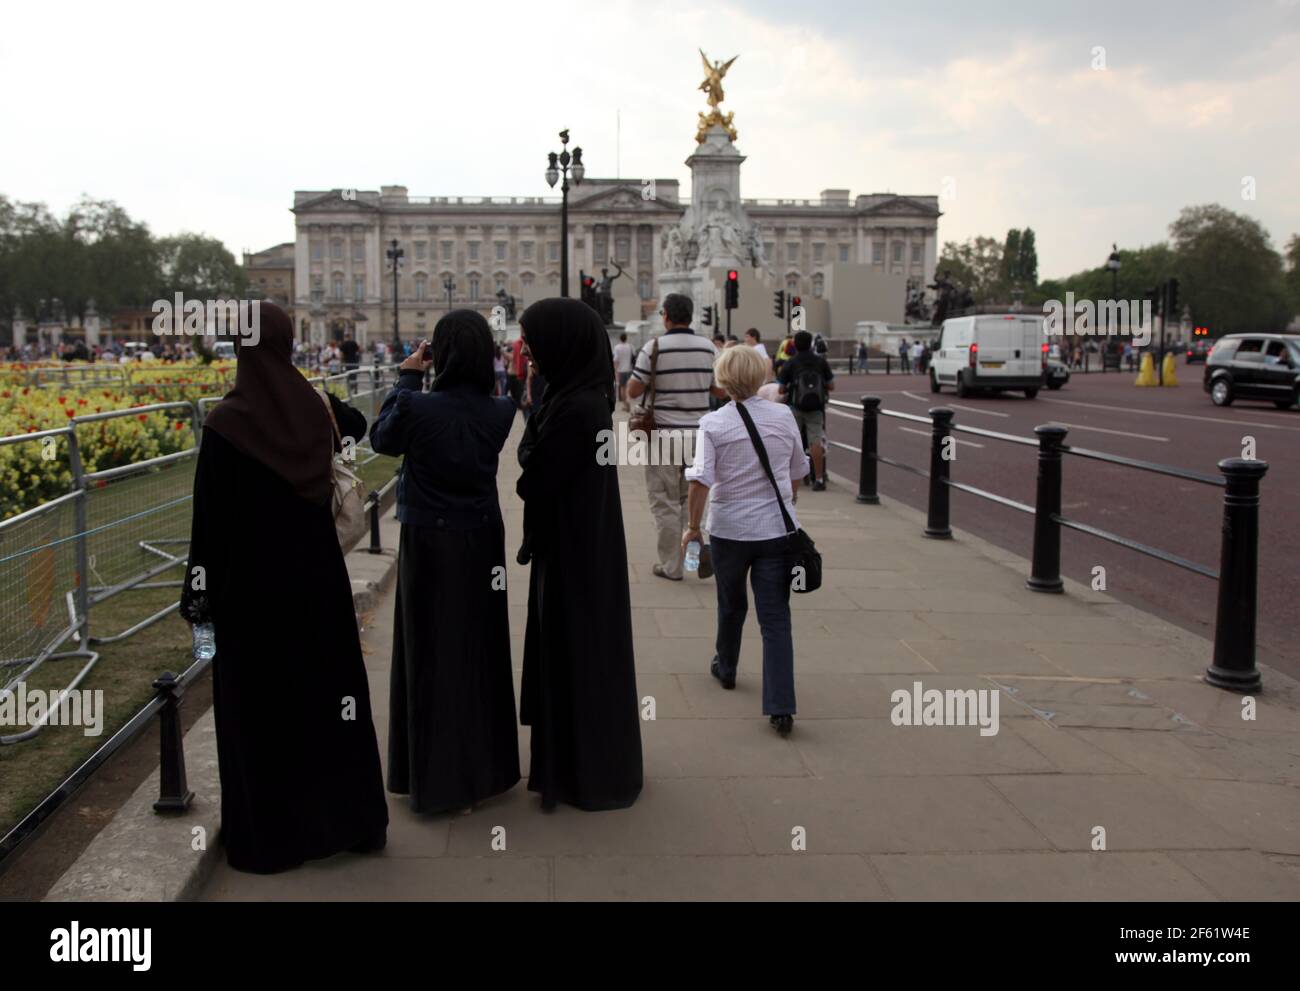 21 April 2011. London, England. Tourists. Muslim women in full veils take photographs  outside Buckingham Palace amid tight security in the run up to Stock Photo